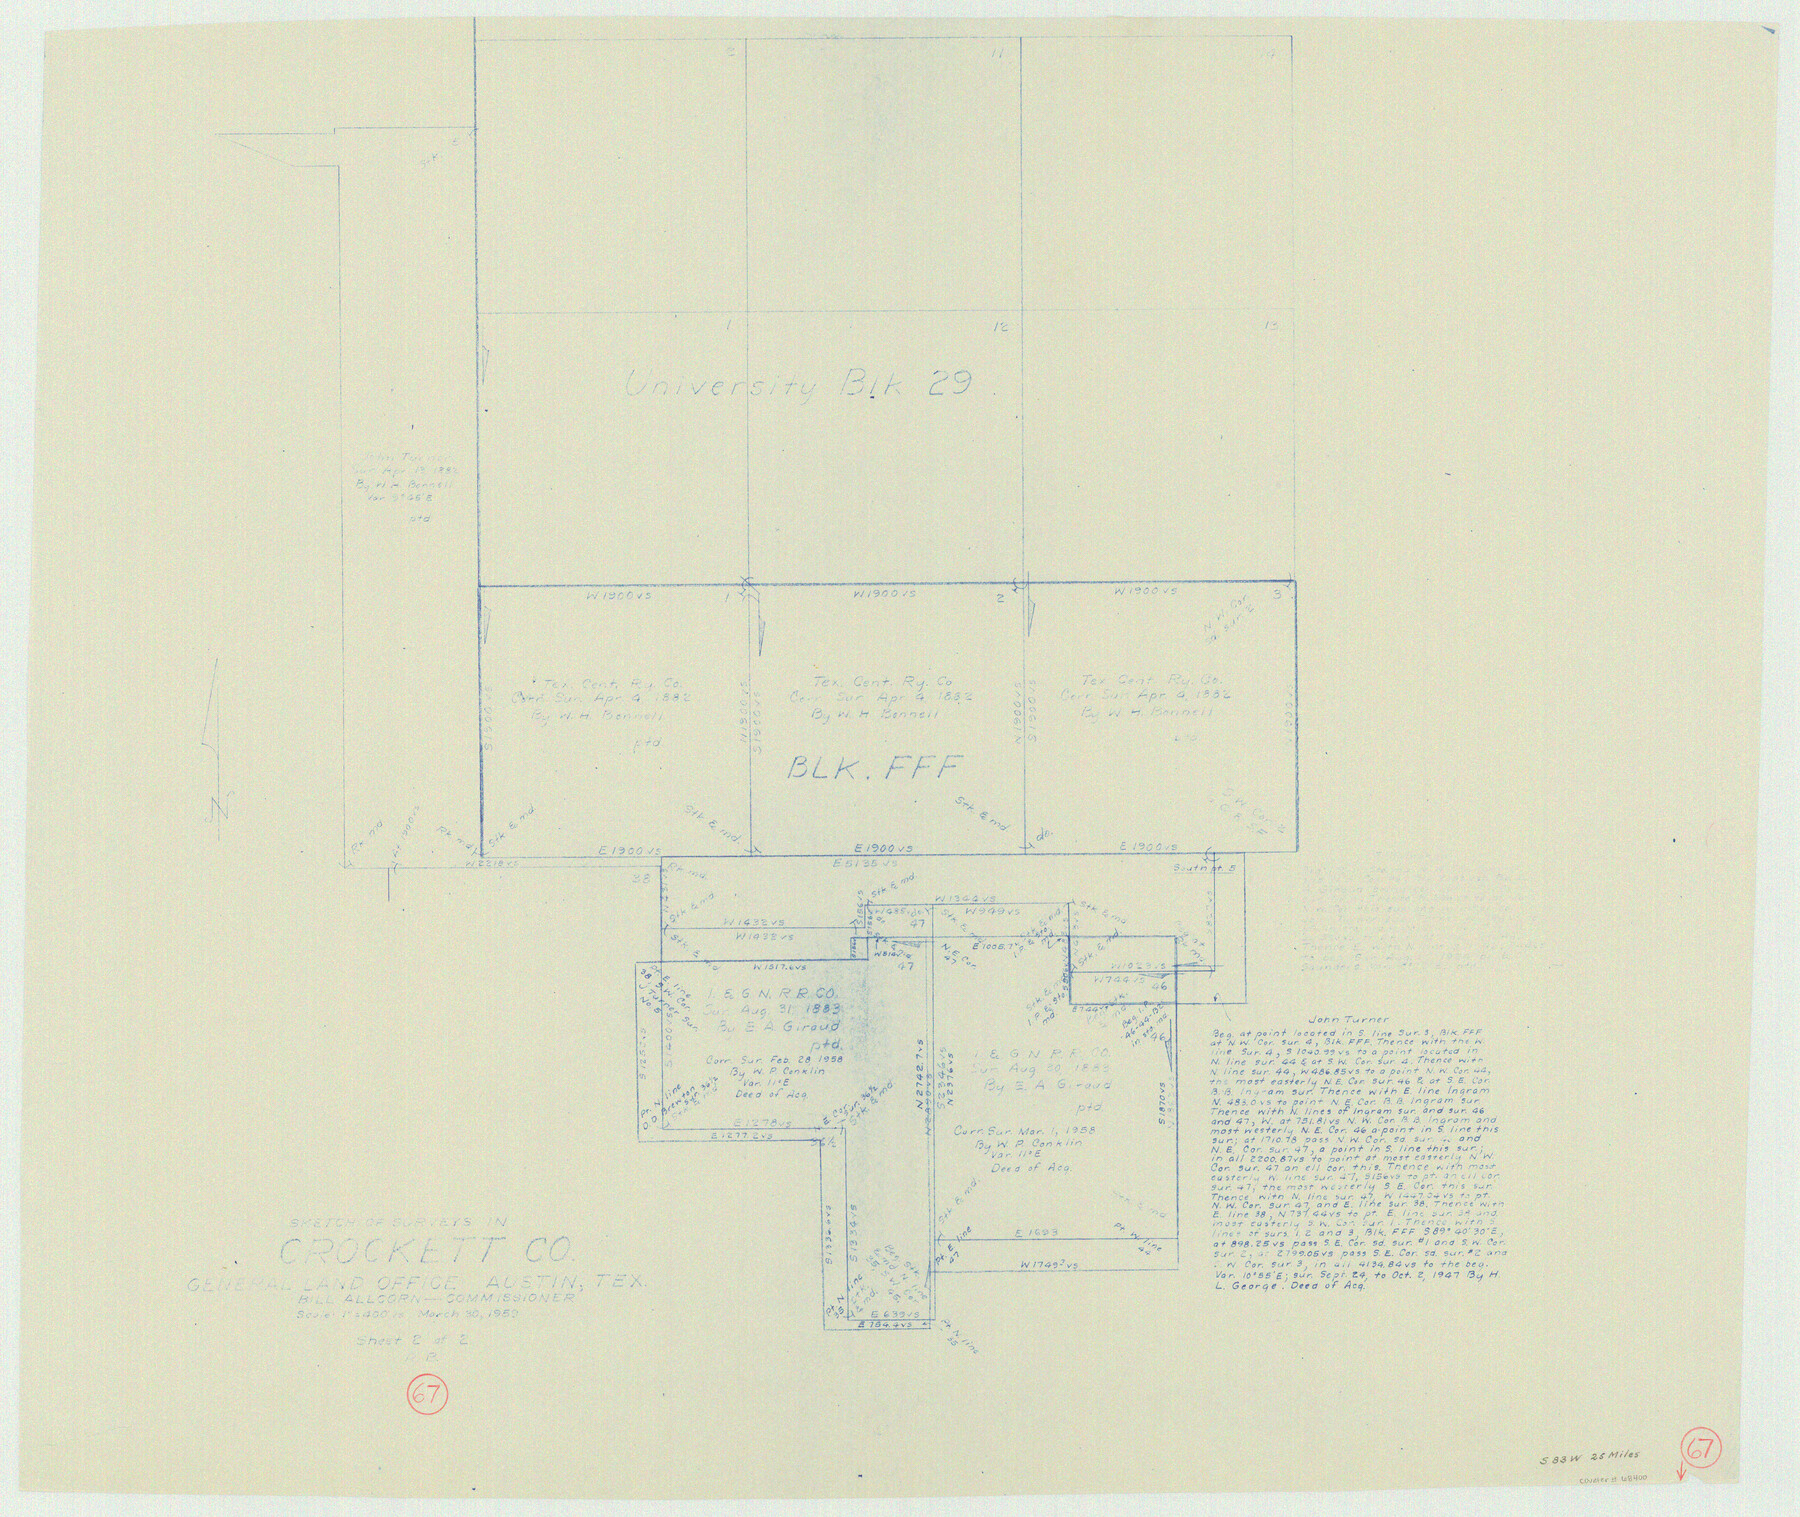 68400, Crockett County Working Sketch 67, General Map Collection